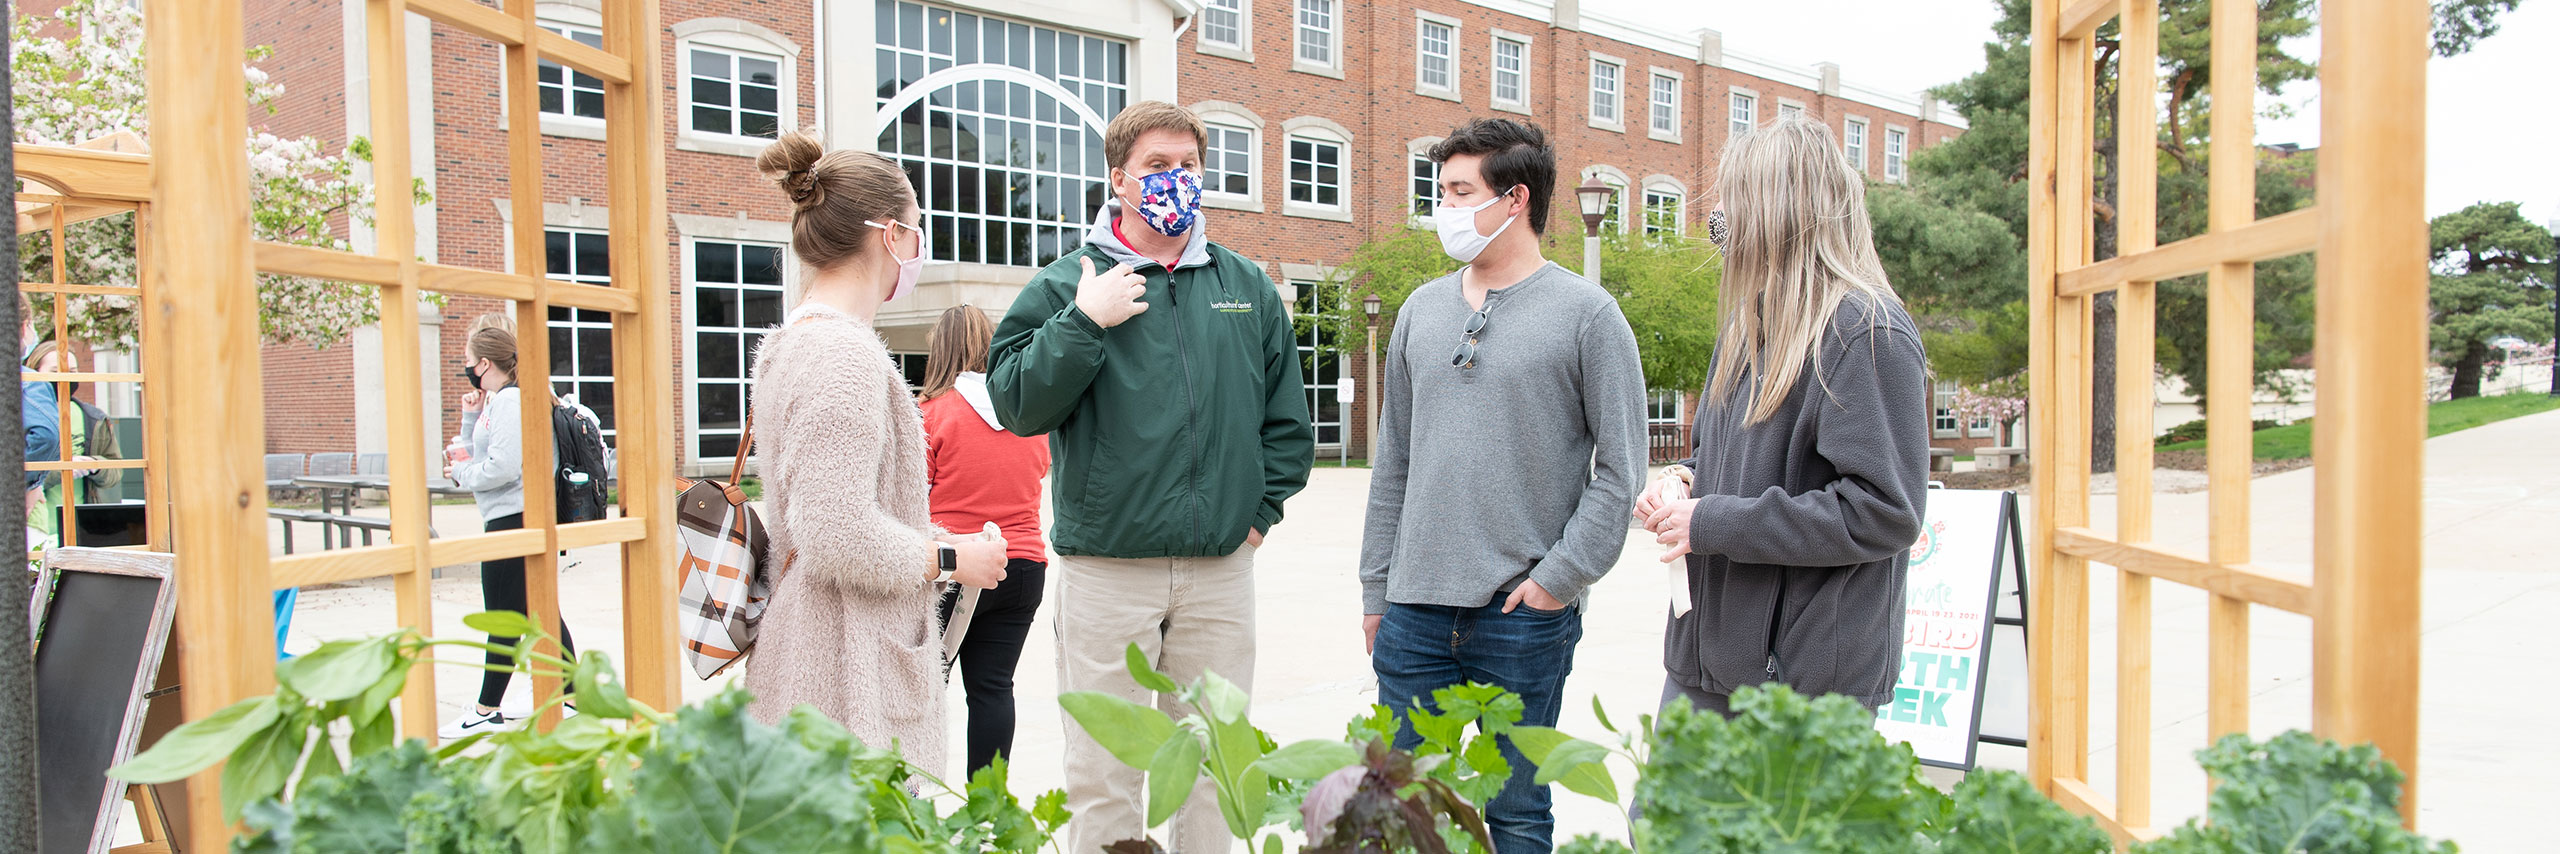 Students talking over an herb garden.